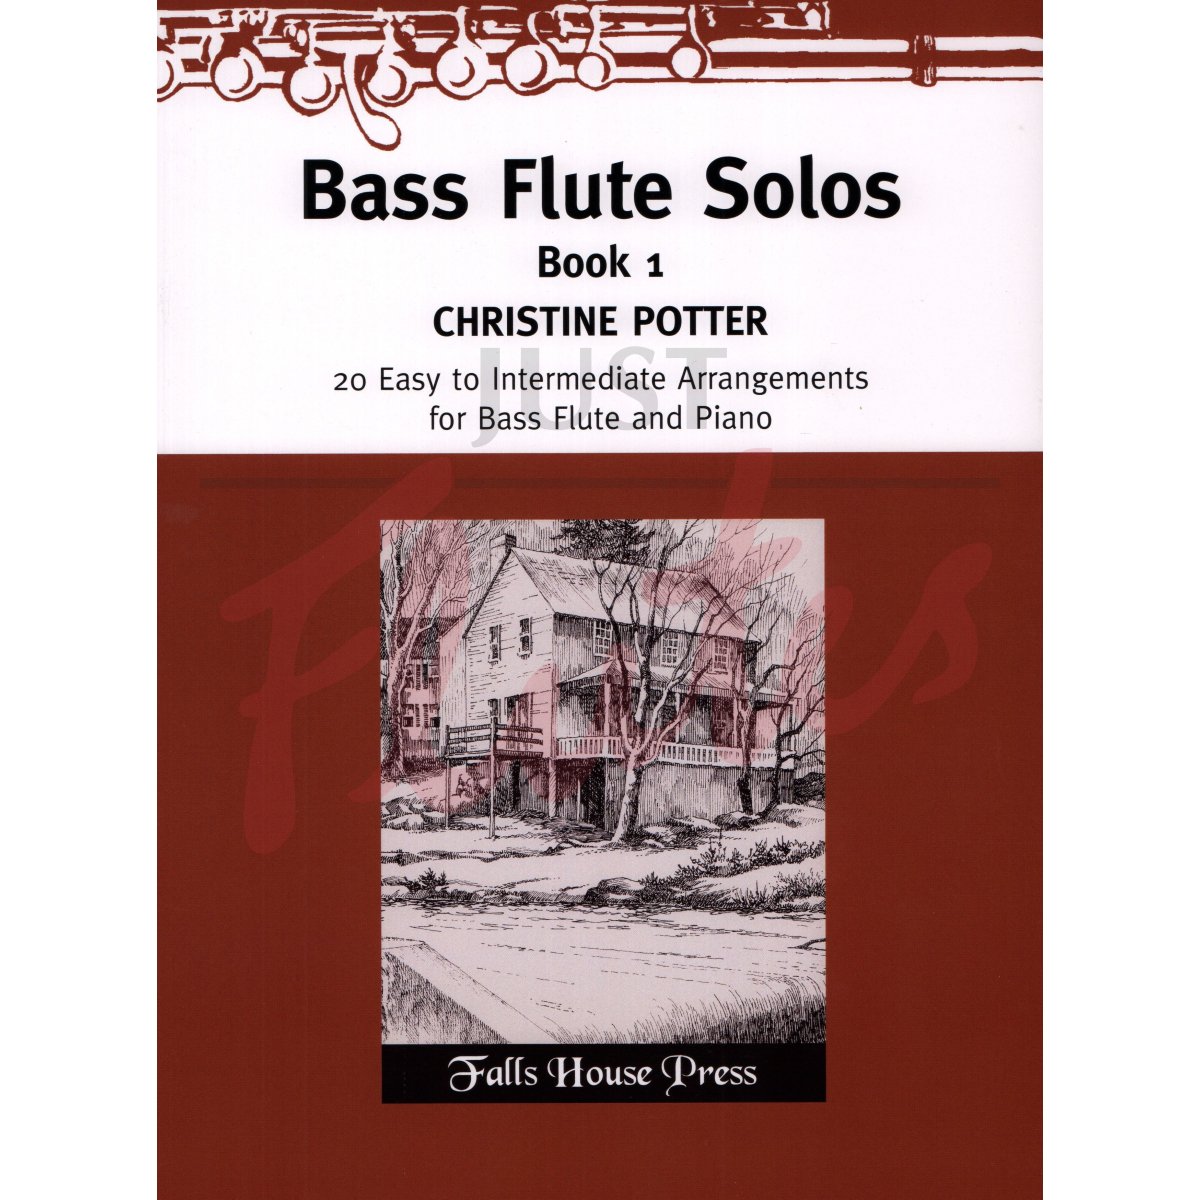 Bass Flute Solos Book 1 with Piano Accompaniment